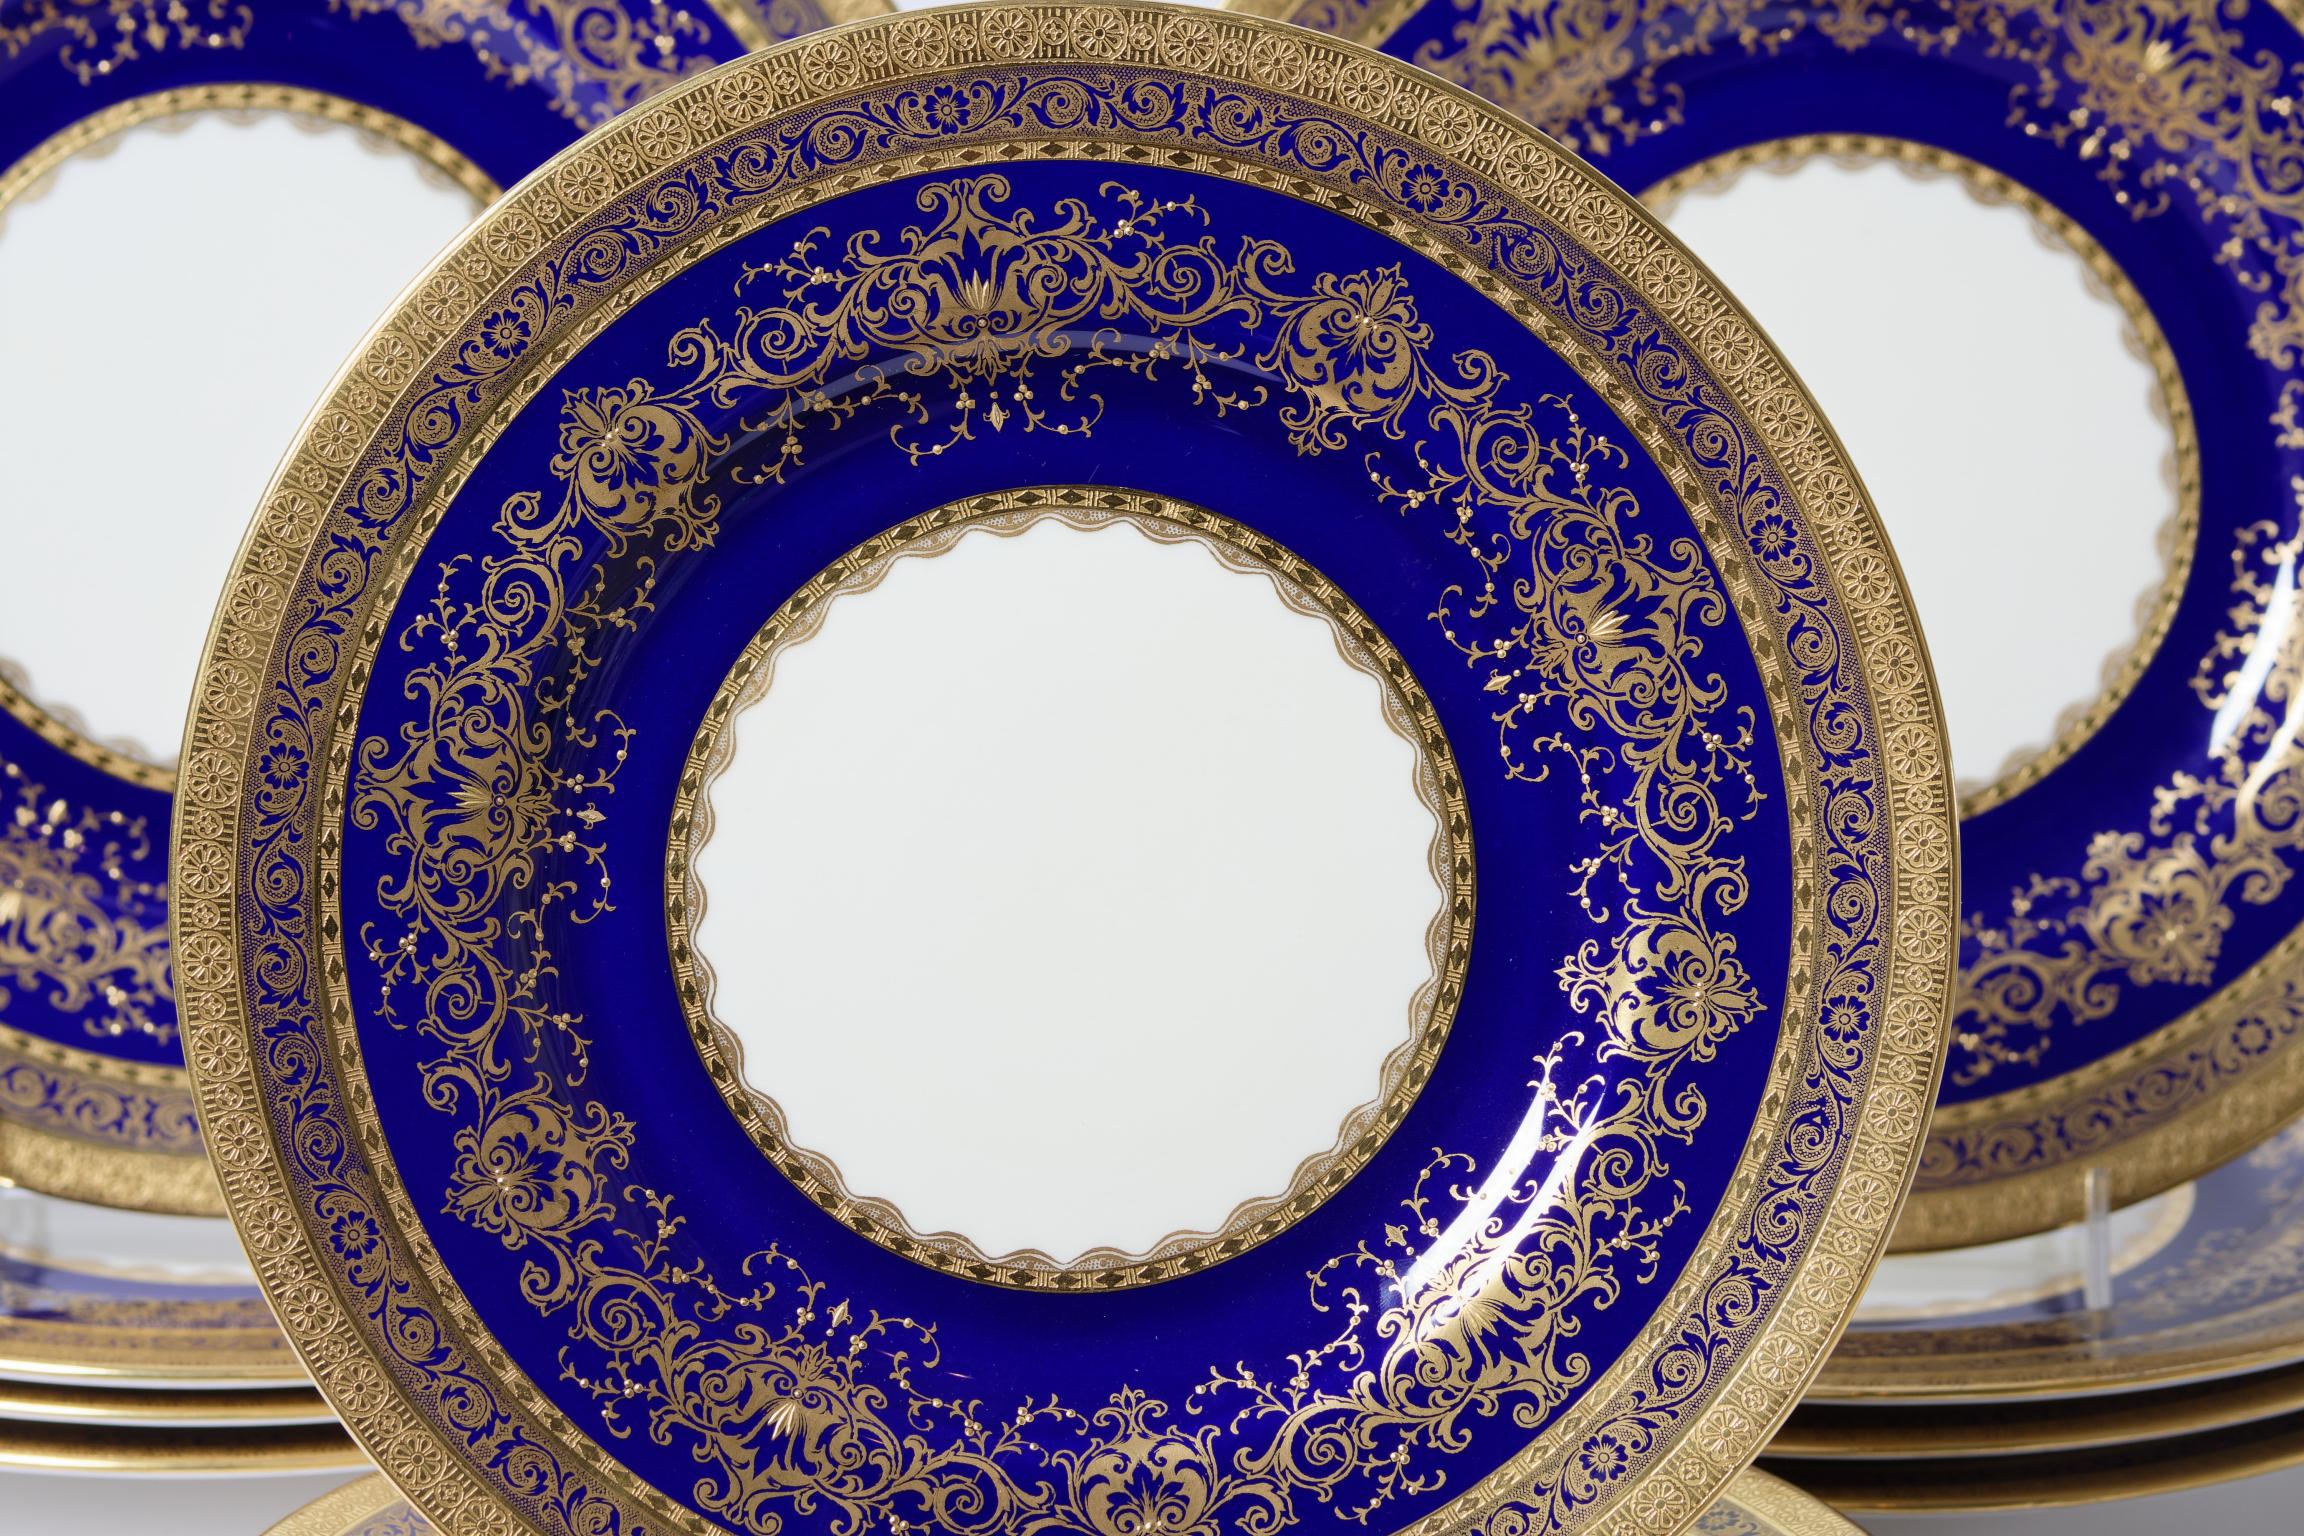 12 Minton Cobalt Blue Gilt Encrusted Dinner Plates, Custom Antique, circa 1900 In Good Condition For Sale In West Palm Beach, FL